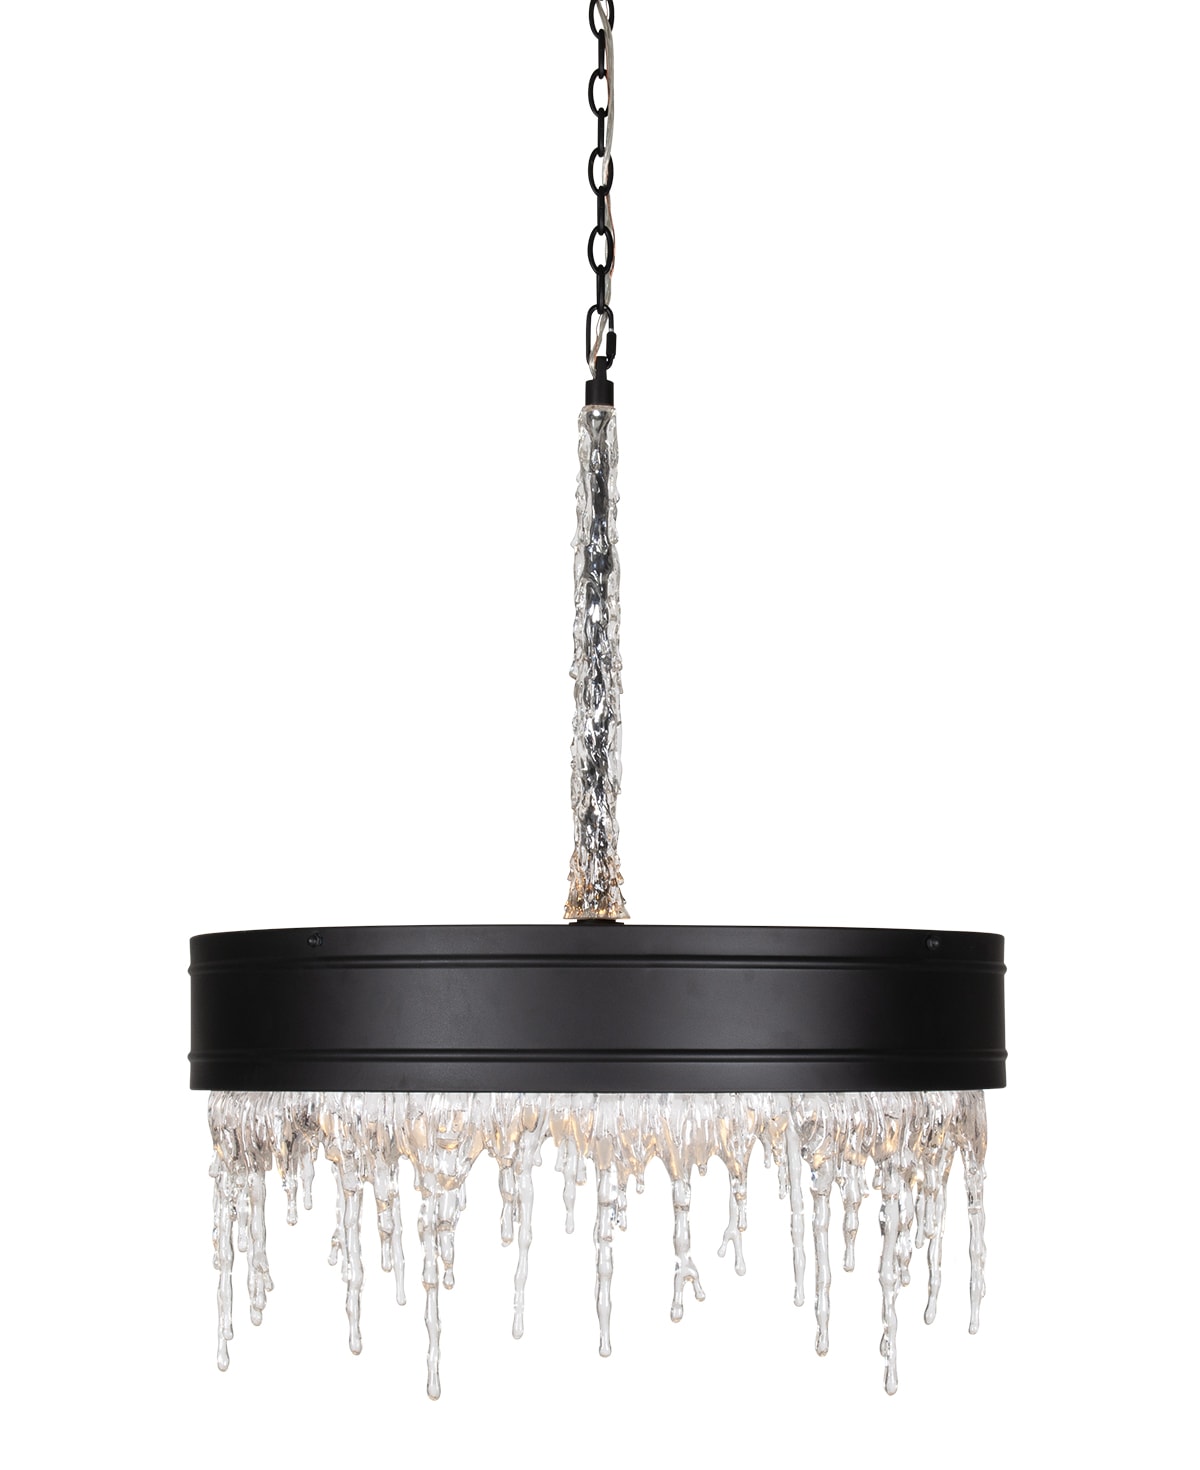 FlowDecor Juniper Chandelier in metal with black matte finish and acrylic (# 6053)